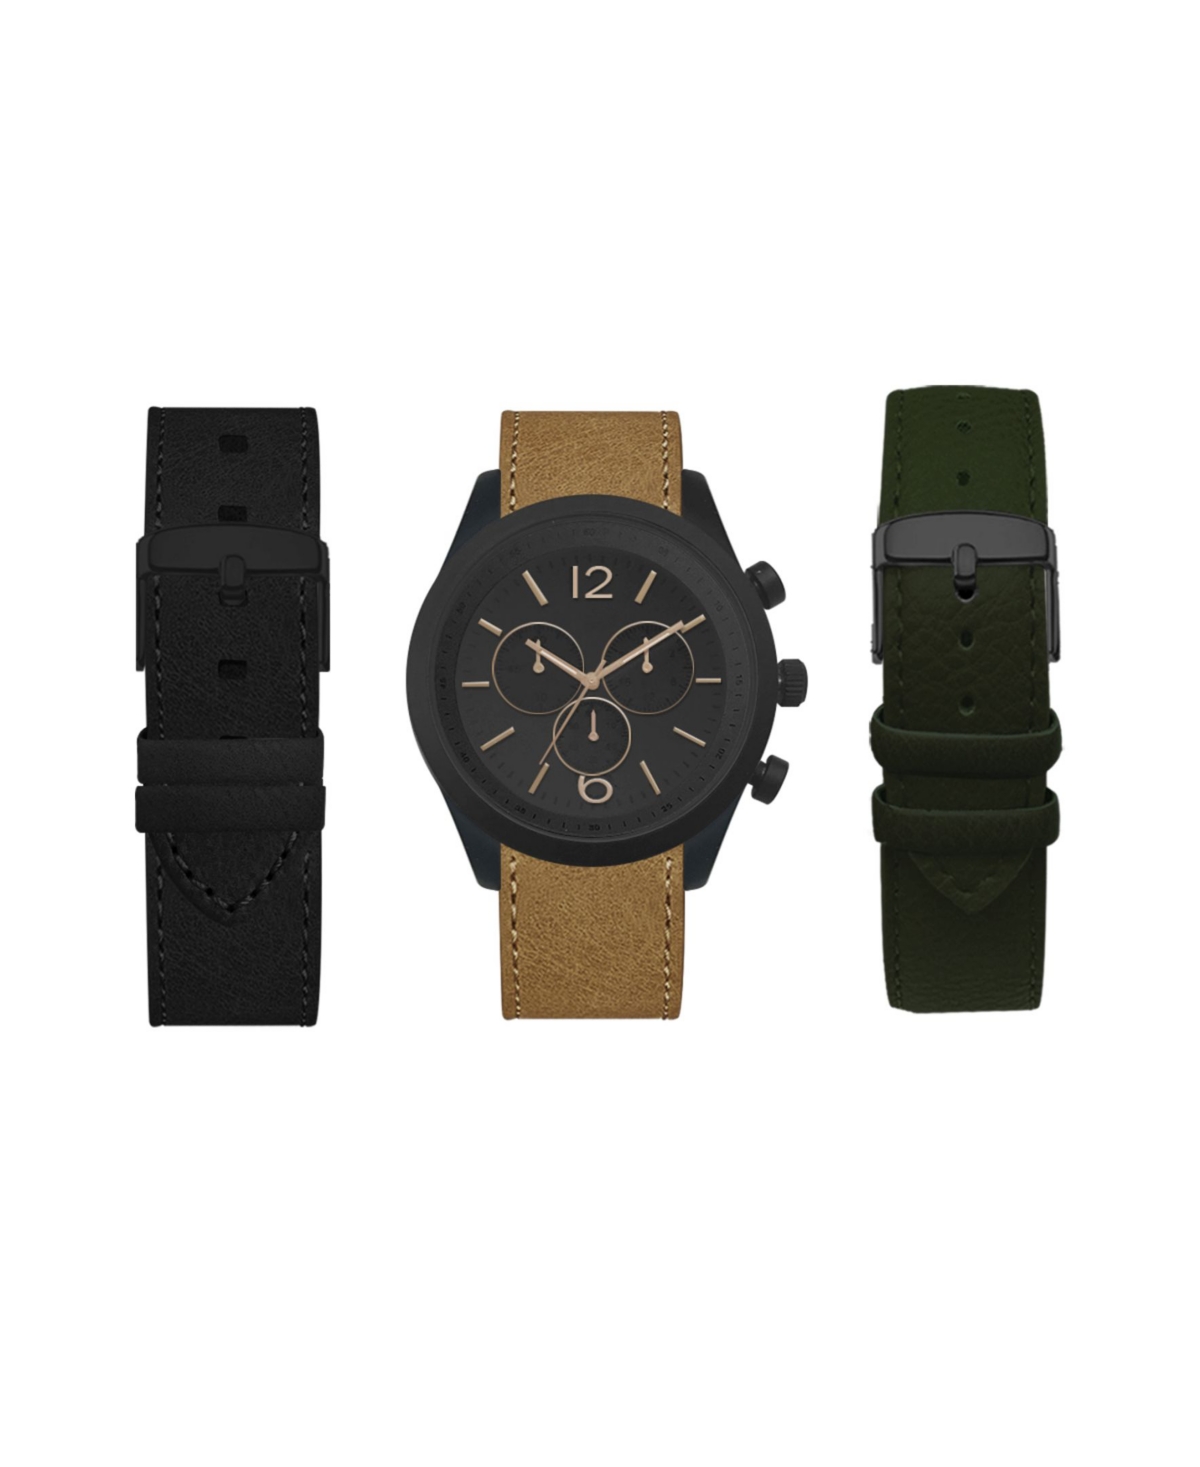 American Exchange Men's Analog Black Strap Watch 44mm with Black, Light Cognac and Olive Camo Interchangeable Straps Set